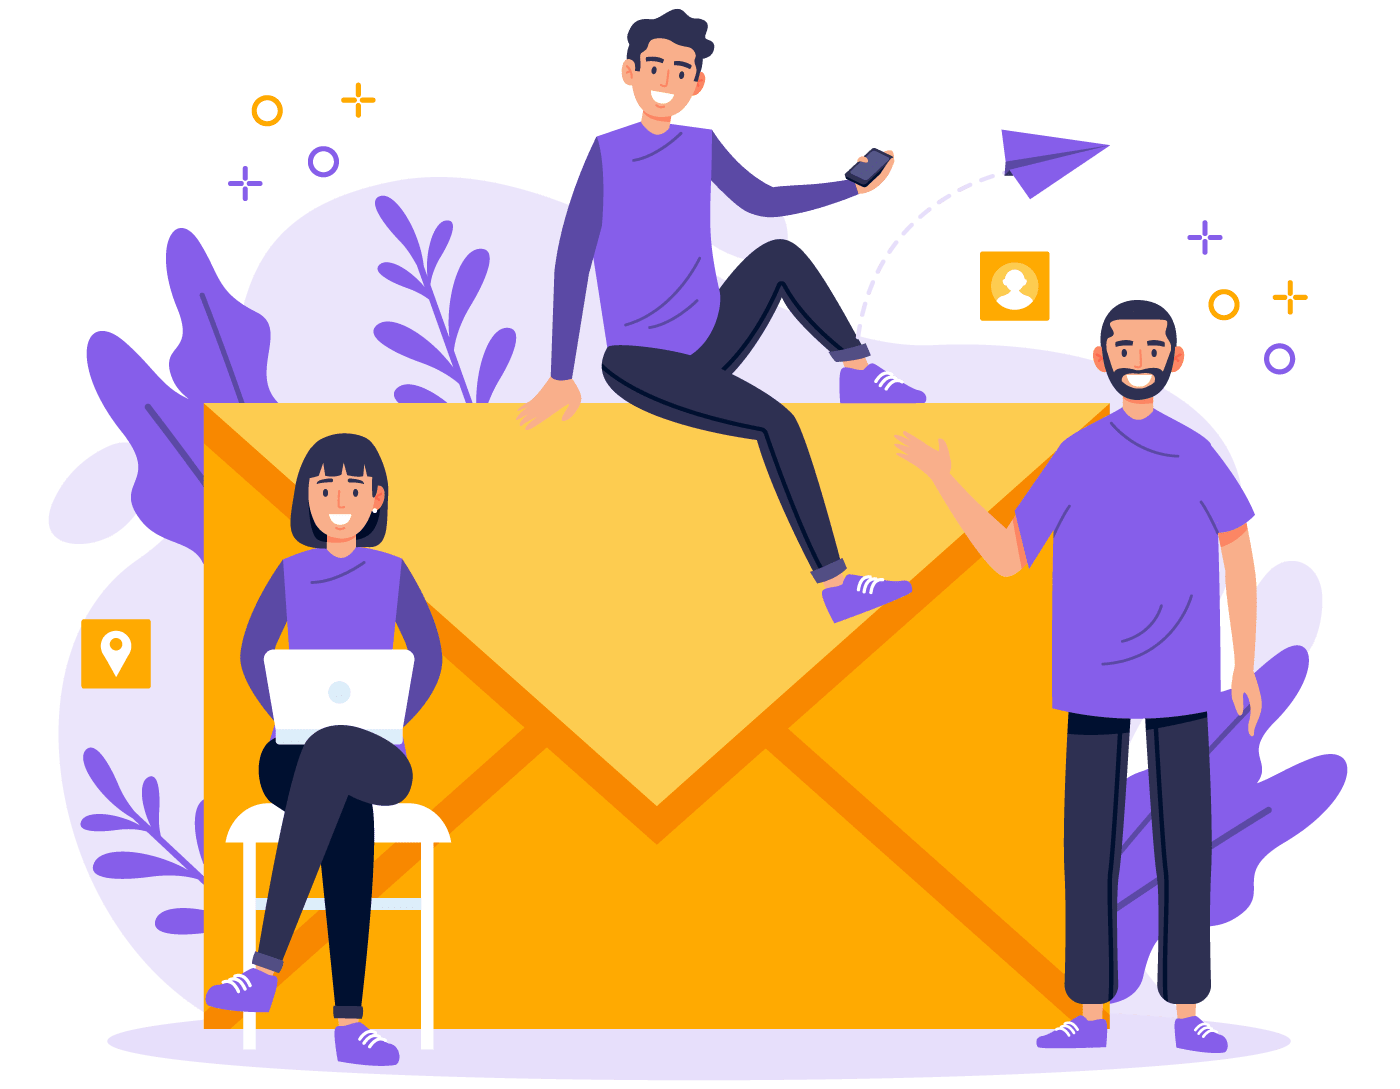 why emailer design?